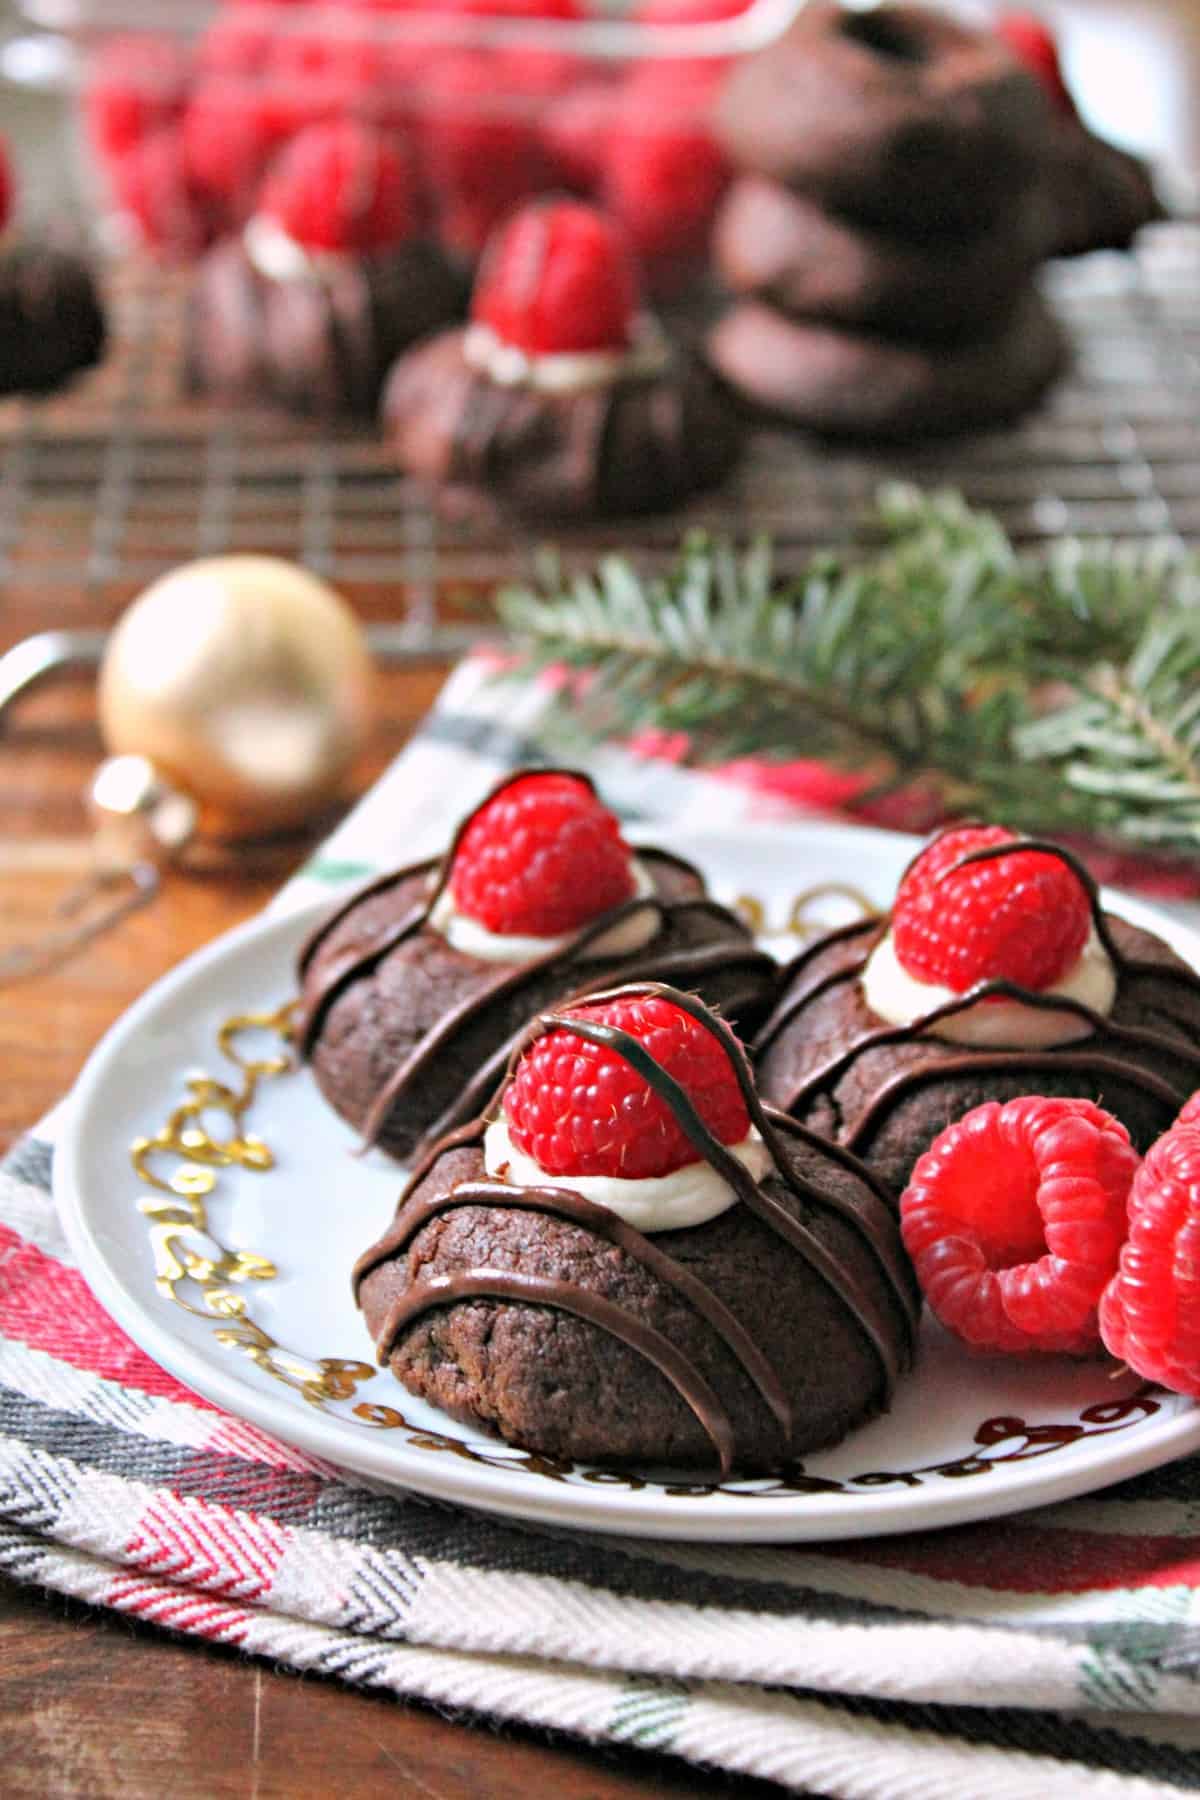 Raspberry Cheesecake Chocolate Thumbprint Cookies! This thumbprint cookie recipe will become a family favorite: Tender chocolate cookies filled with creamy "cheesecake" filling, fresh raspberries and topped with a chocolate drizzle! A beauty to share for holiday cookie exchange parties and beyond.